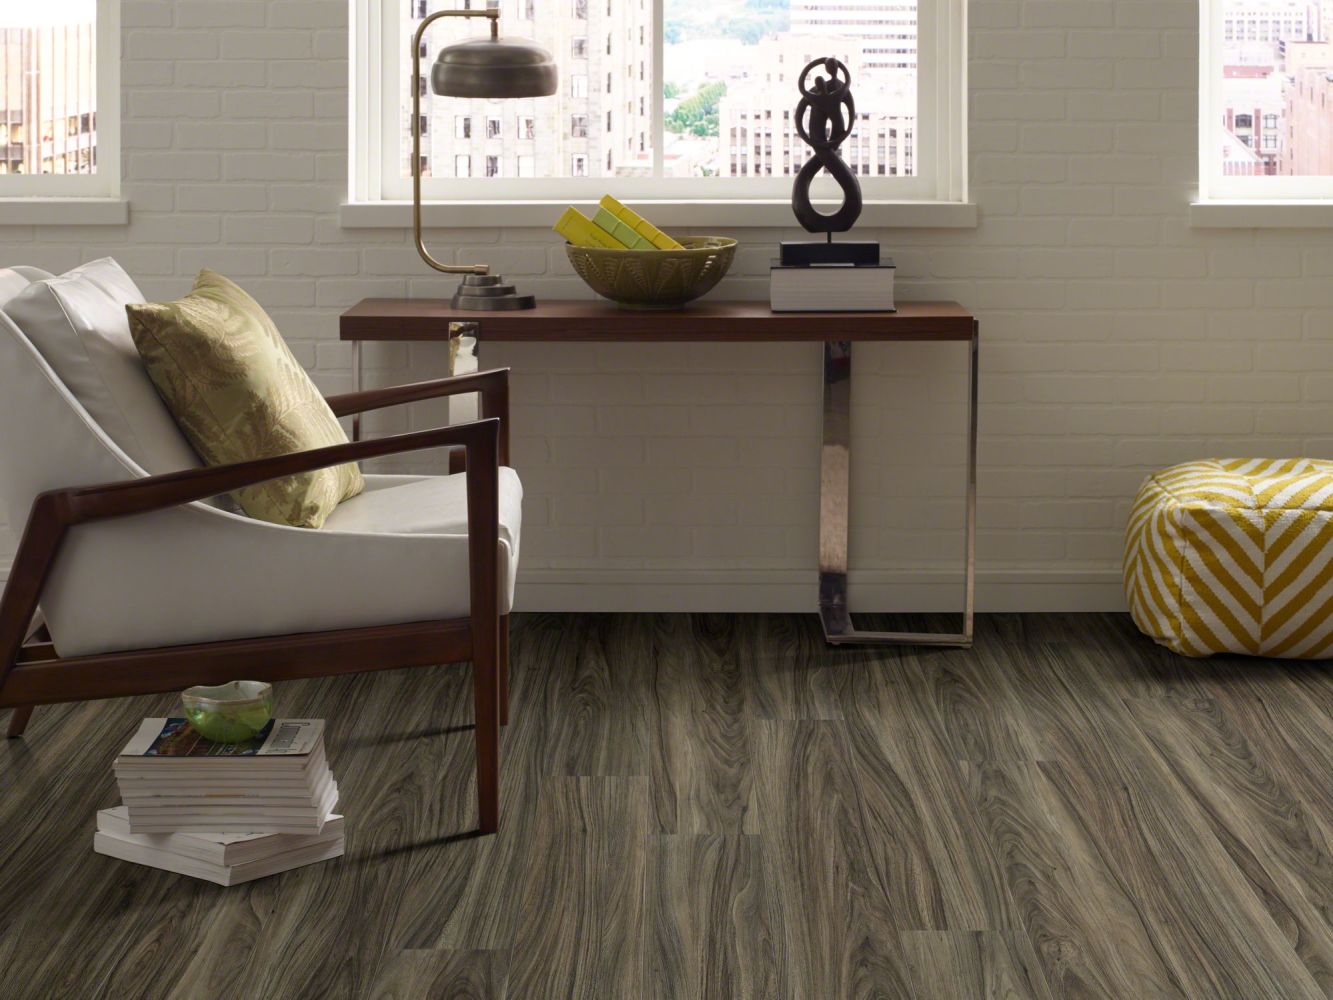 Shaw Floors Resilient Residential Valore Plus Plank Costa 00150_2545V